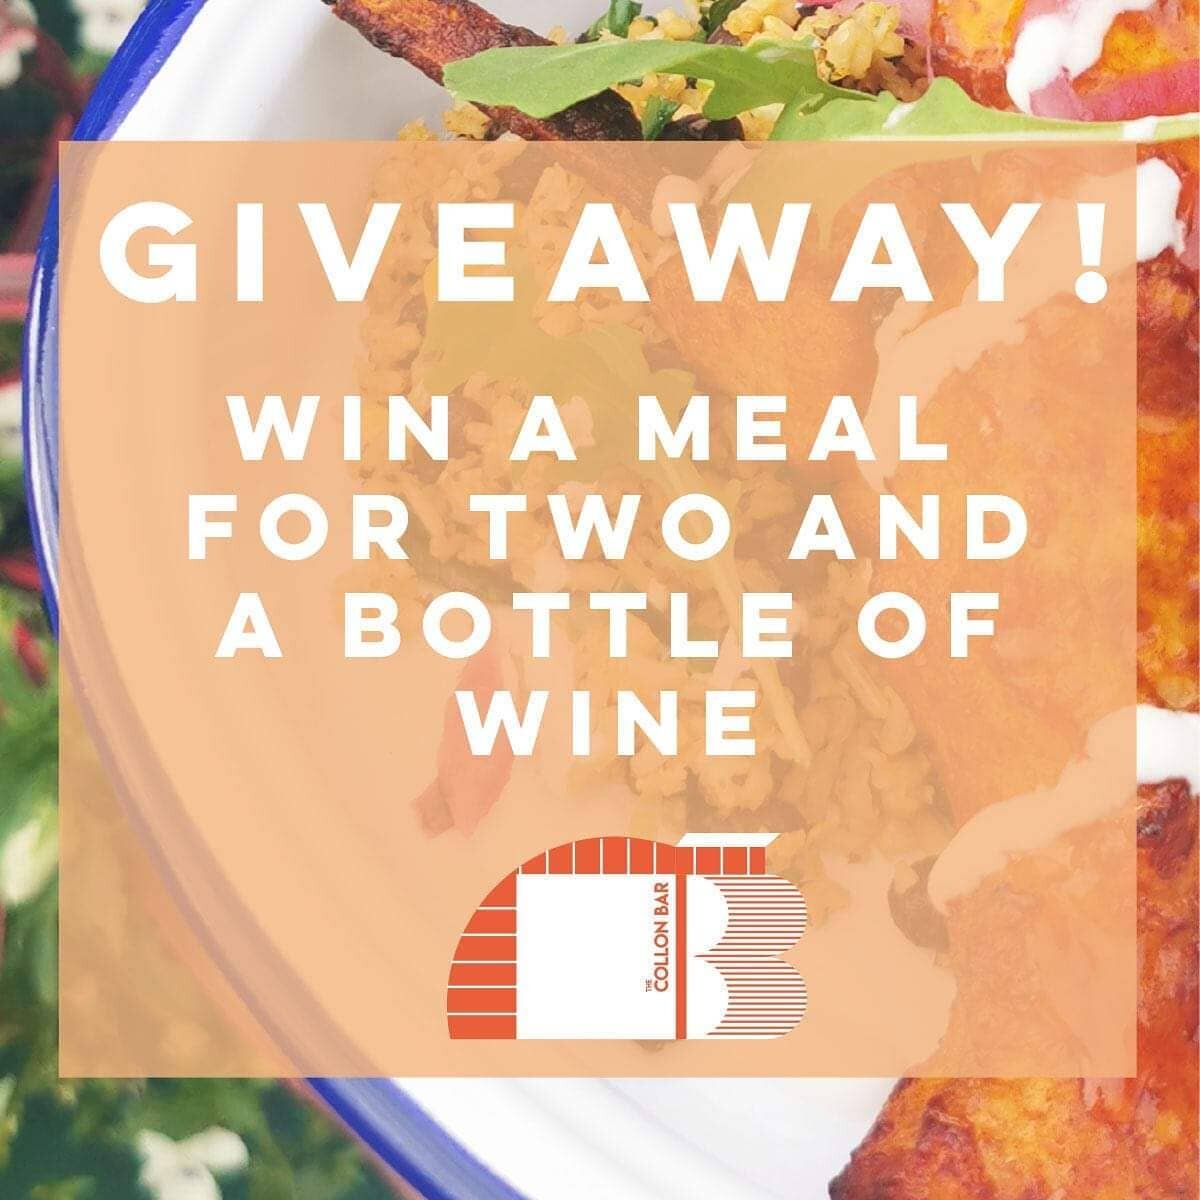 🎉✨✨GIVEAWAY ✨✨🎉

***How to enter***
1️⃣ Like our Instagram page
2️⃣Like this post
3️⃣ tag two friends in the comment section of this post that you think would love to win too.
💥 For an extra entry, share this post in your instagram story.💥

To ce